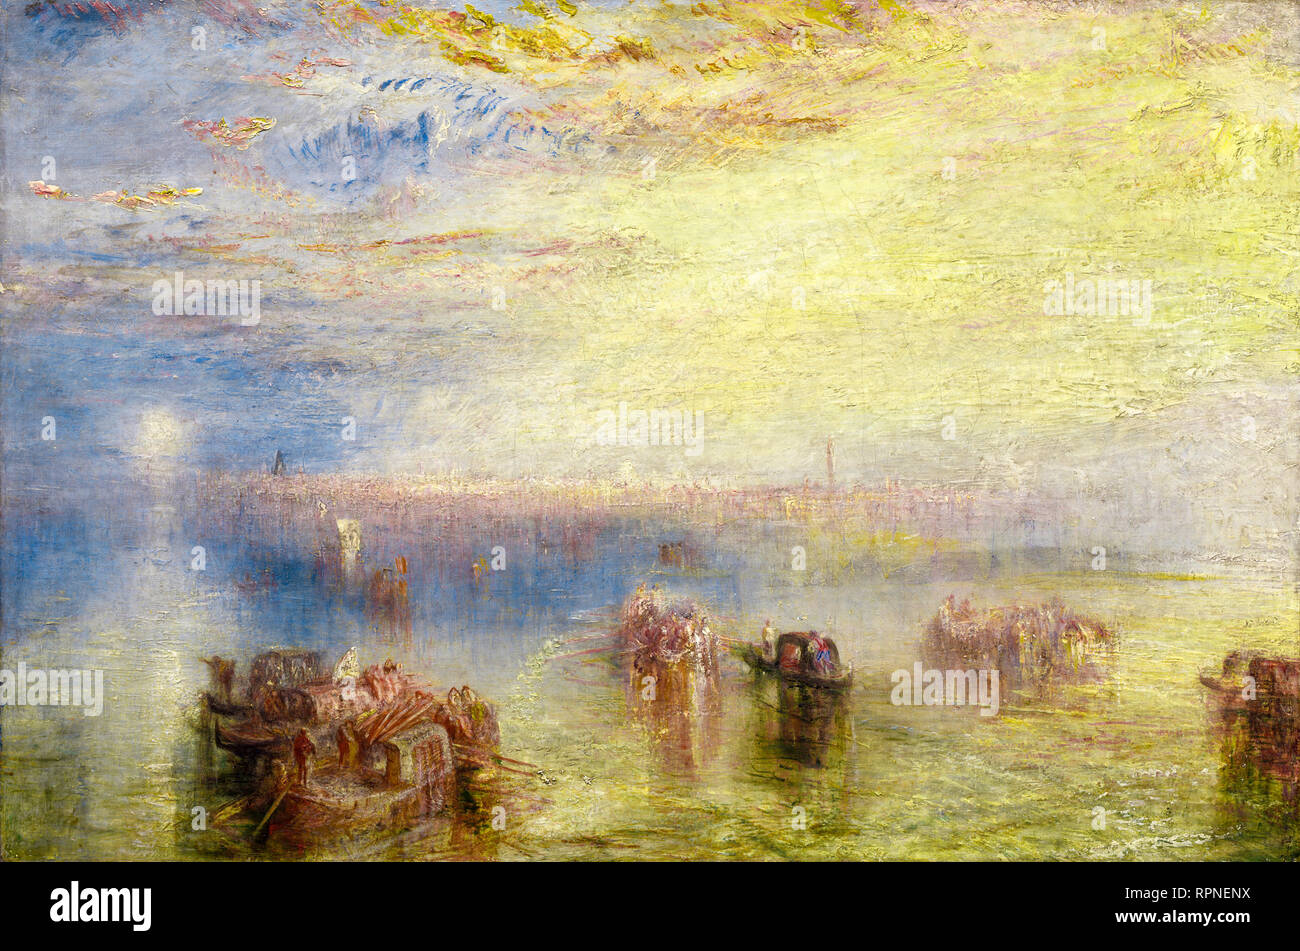 JMW Turner, Approach to Venice, 1844, painting Stock Photo